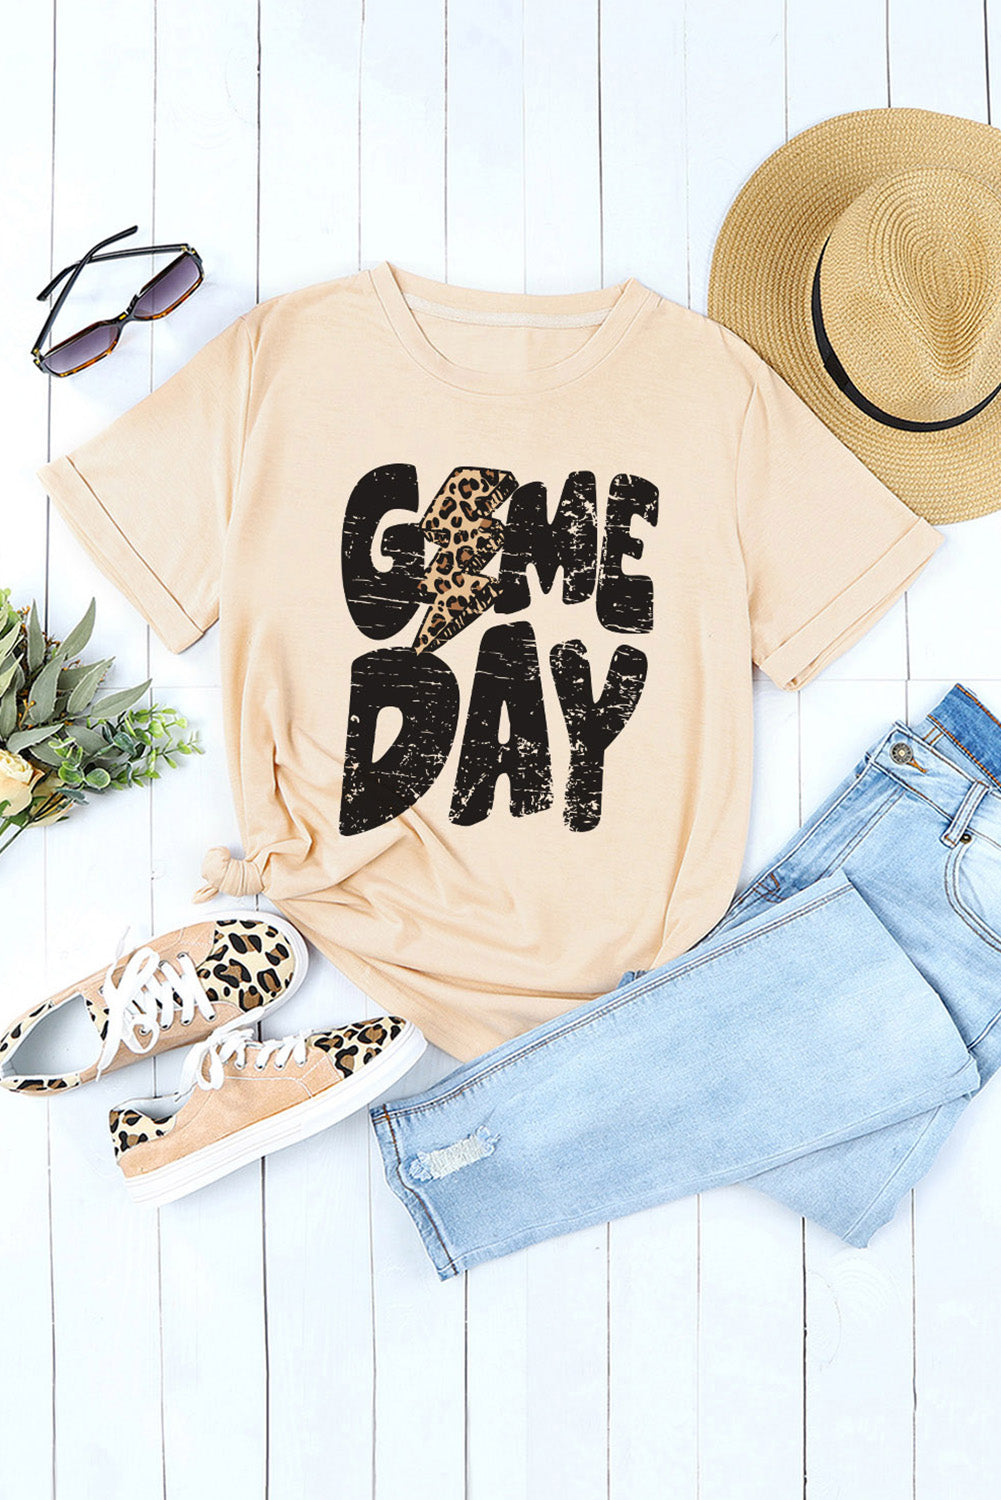 GAME DAY Graphic Tee